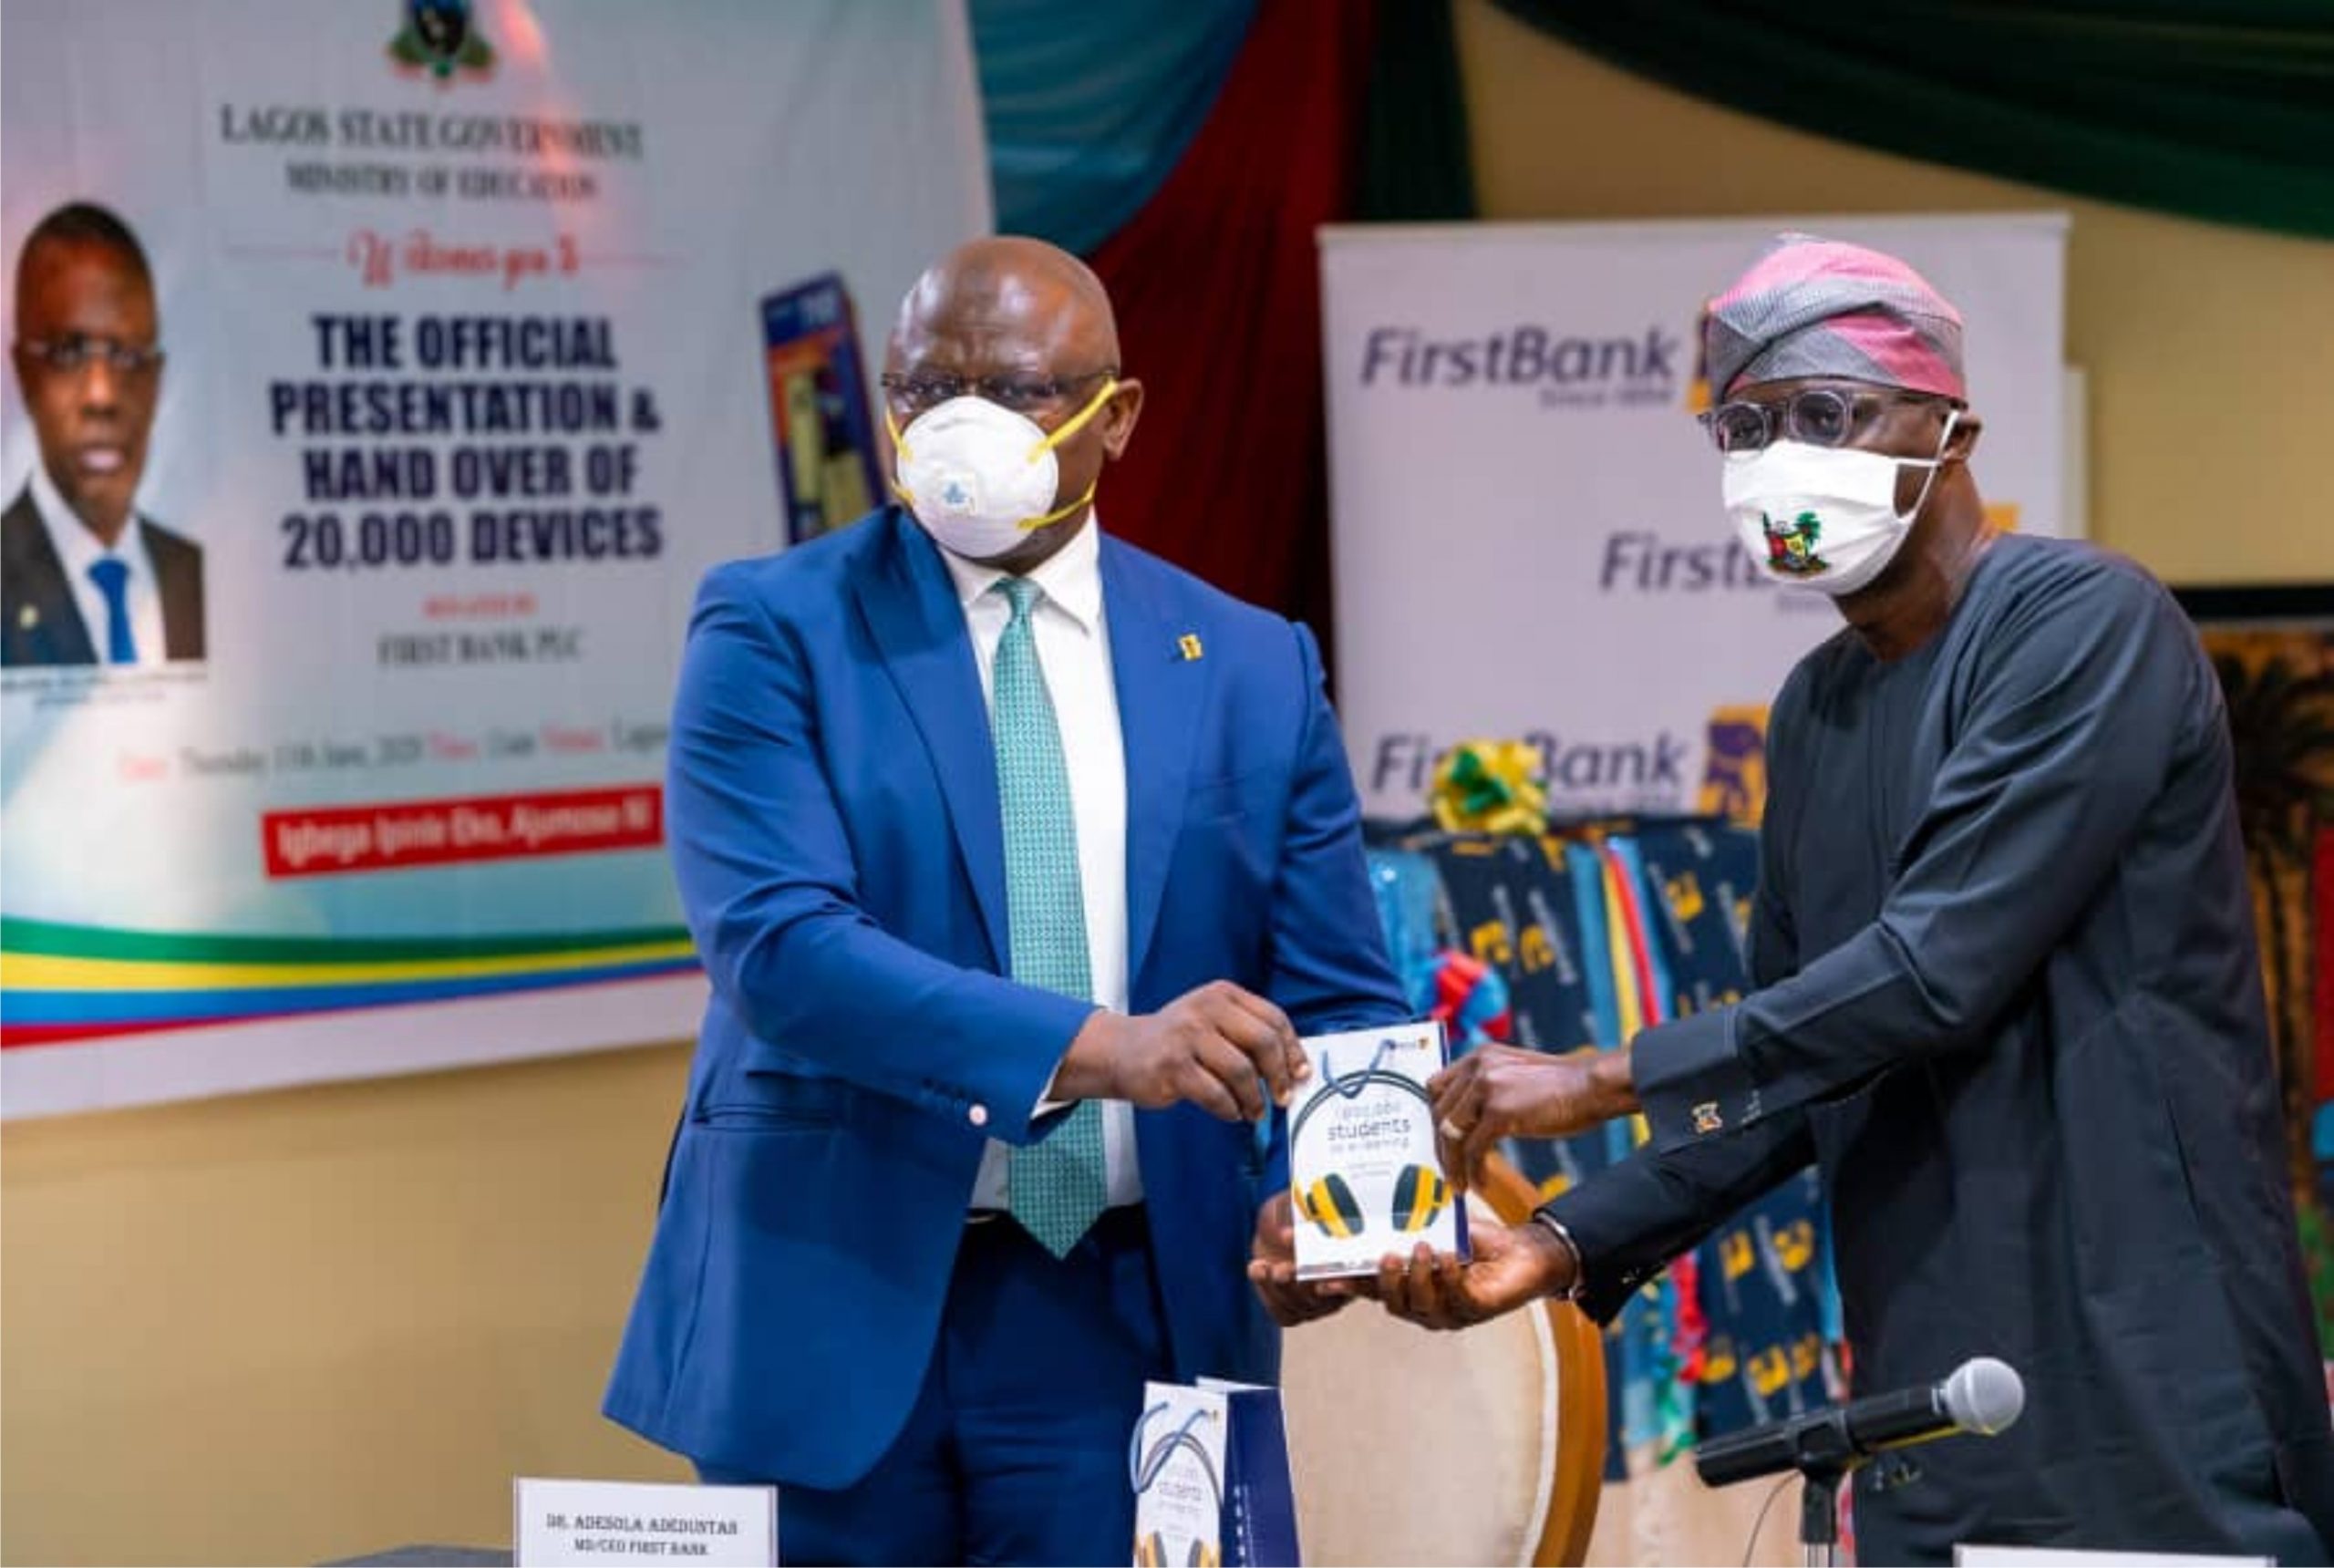 First Bank’s CSR Interventions During COVID-19 Pandemic-marketingspace.com.ng